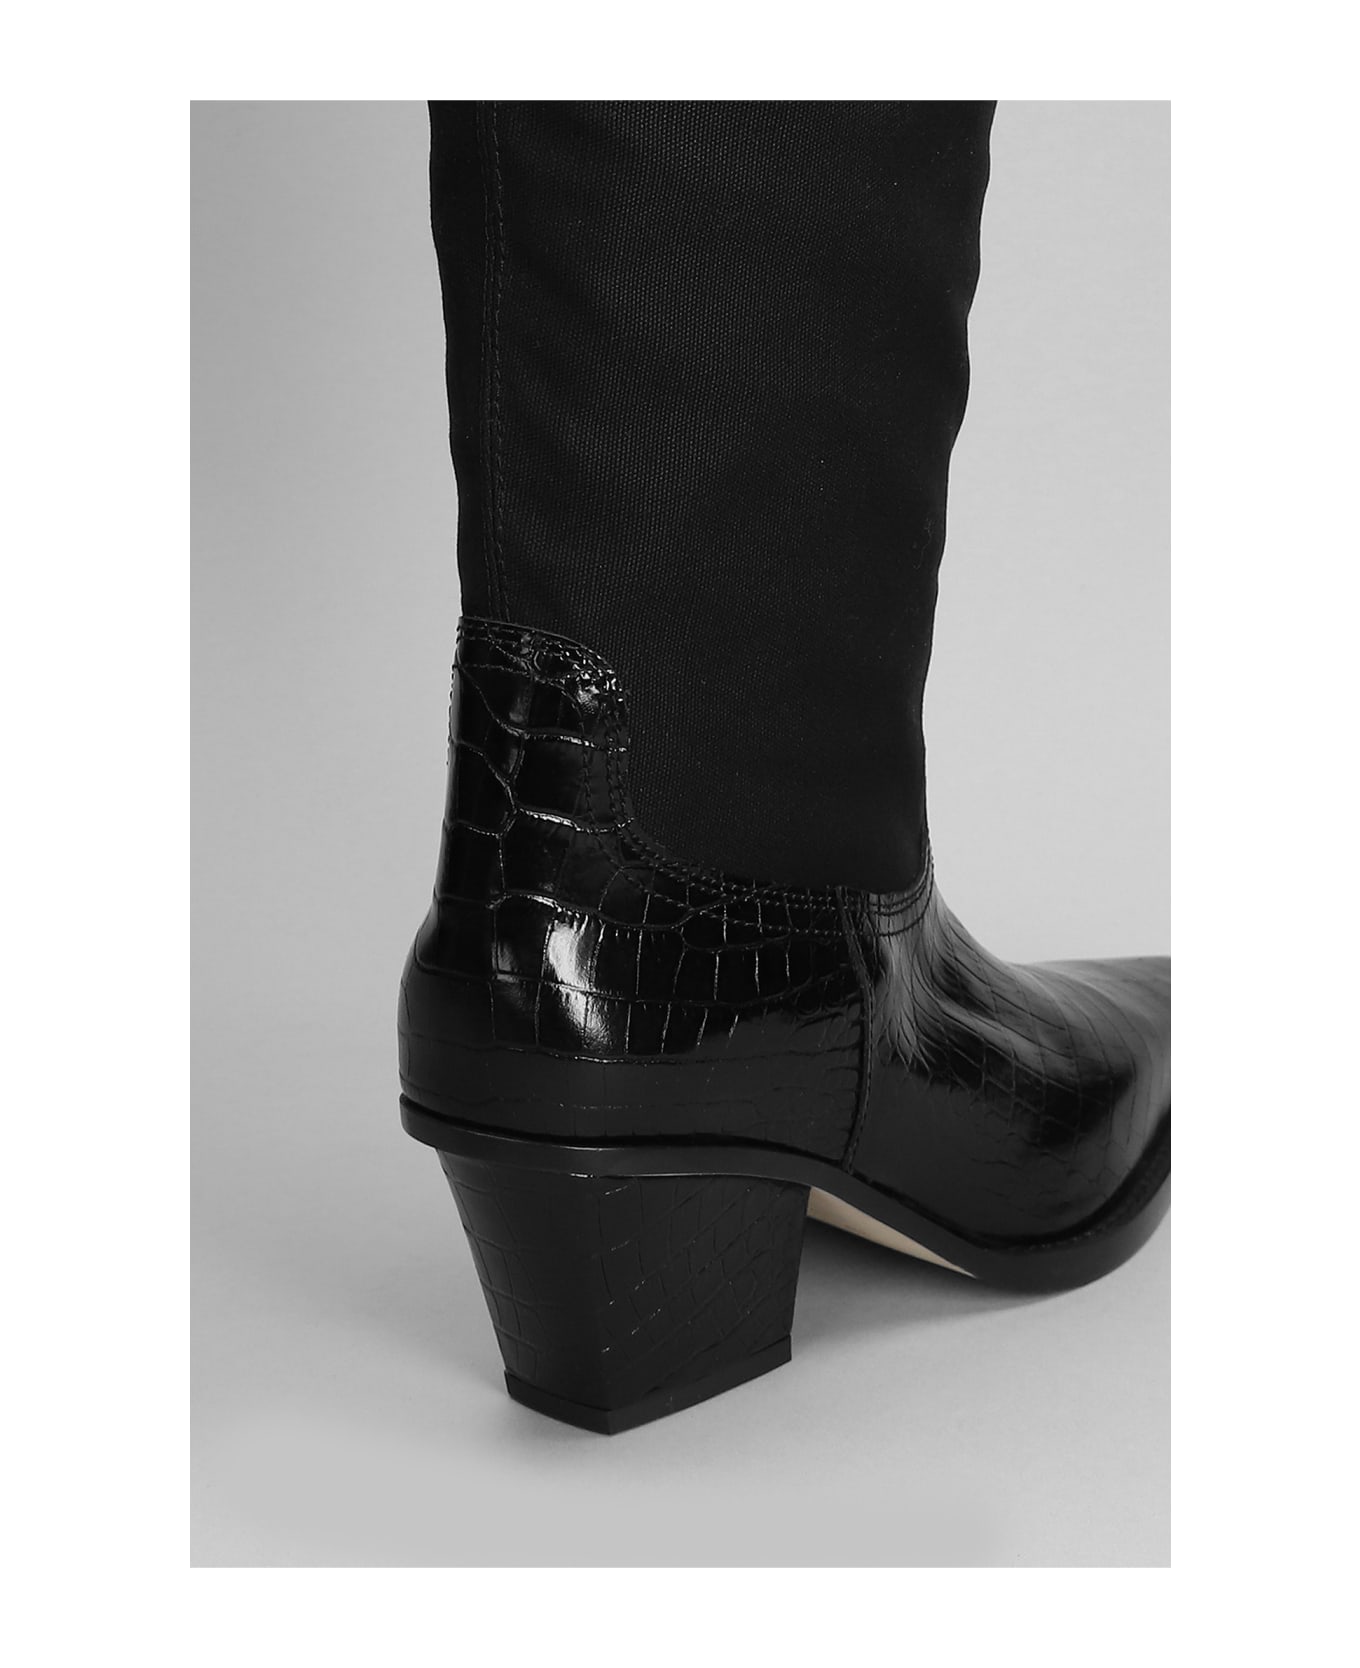 Paris Texas Rosario Texan Boots In Black Leather And Fabric - black